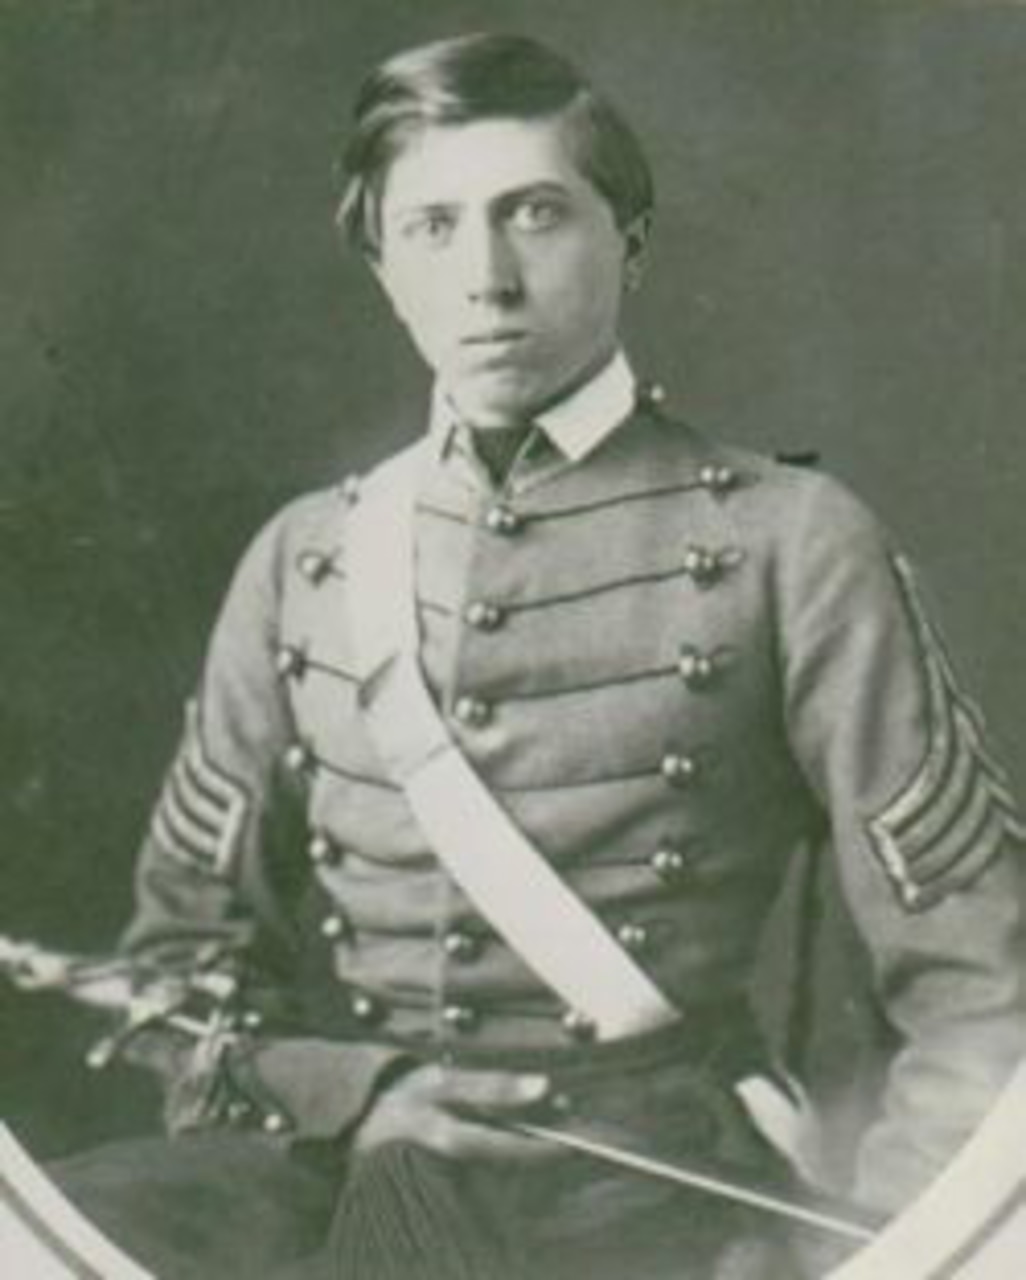 A young Civil War soldier in dress uniform looks at the camera as he holds a sword across his body